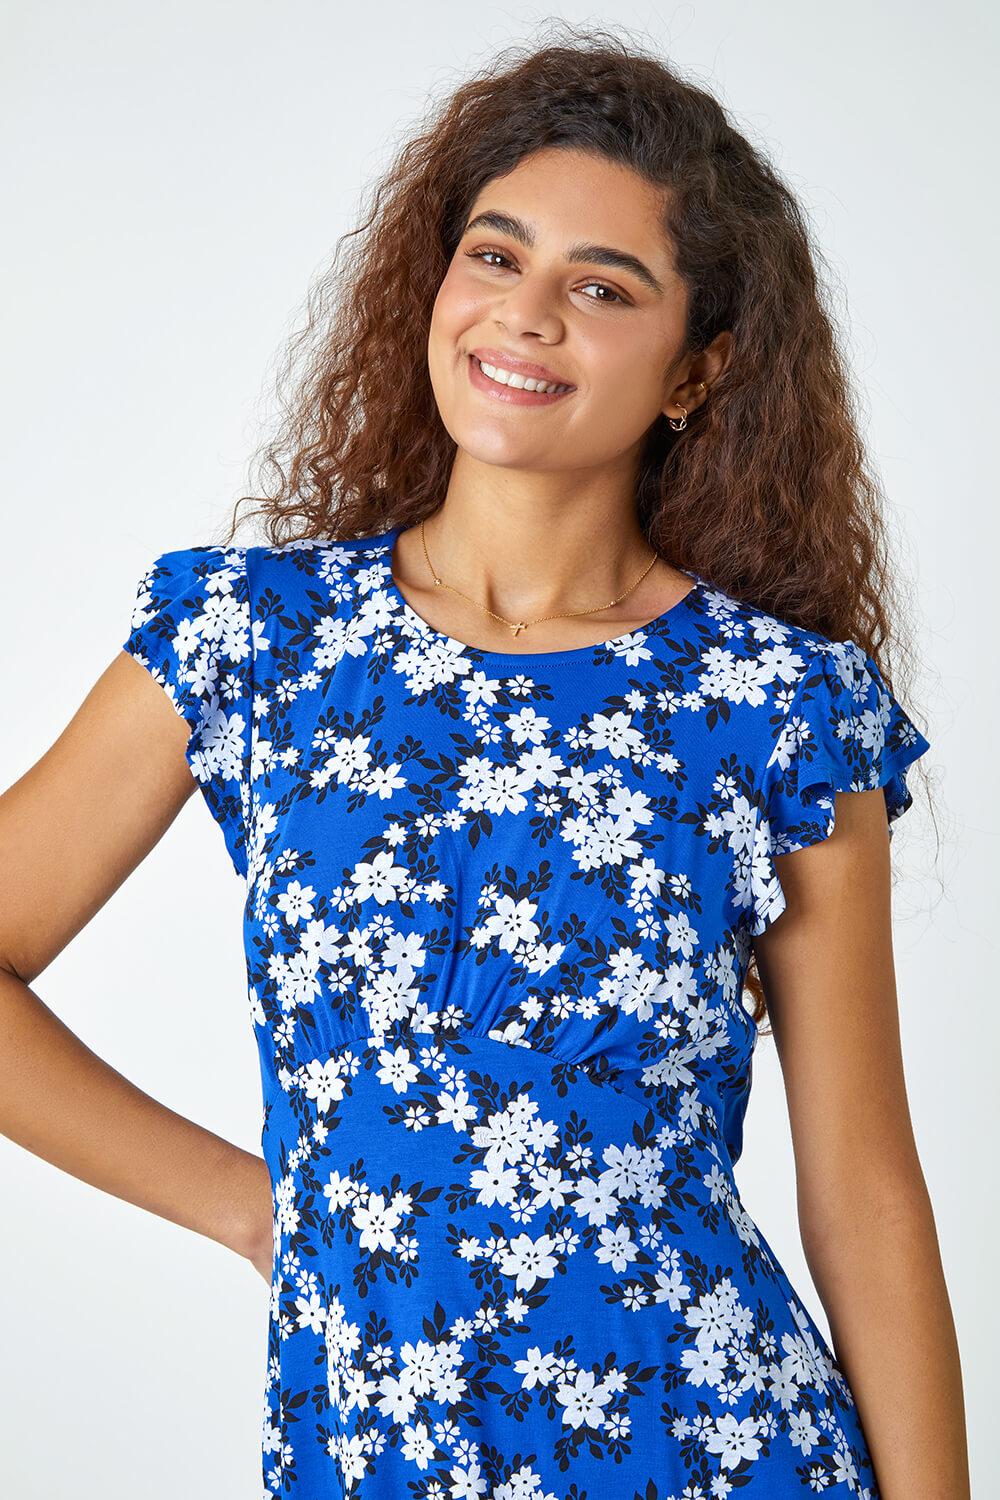 Royal Blue Floral Print Frill Sleeve Stretch Dress, Image 4 of 5